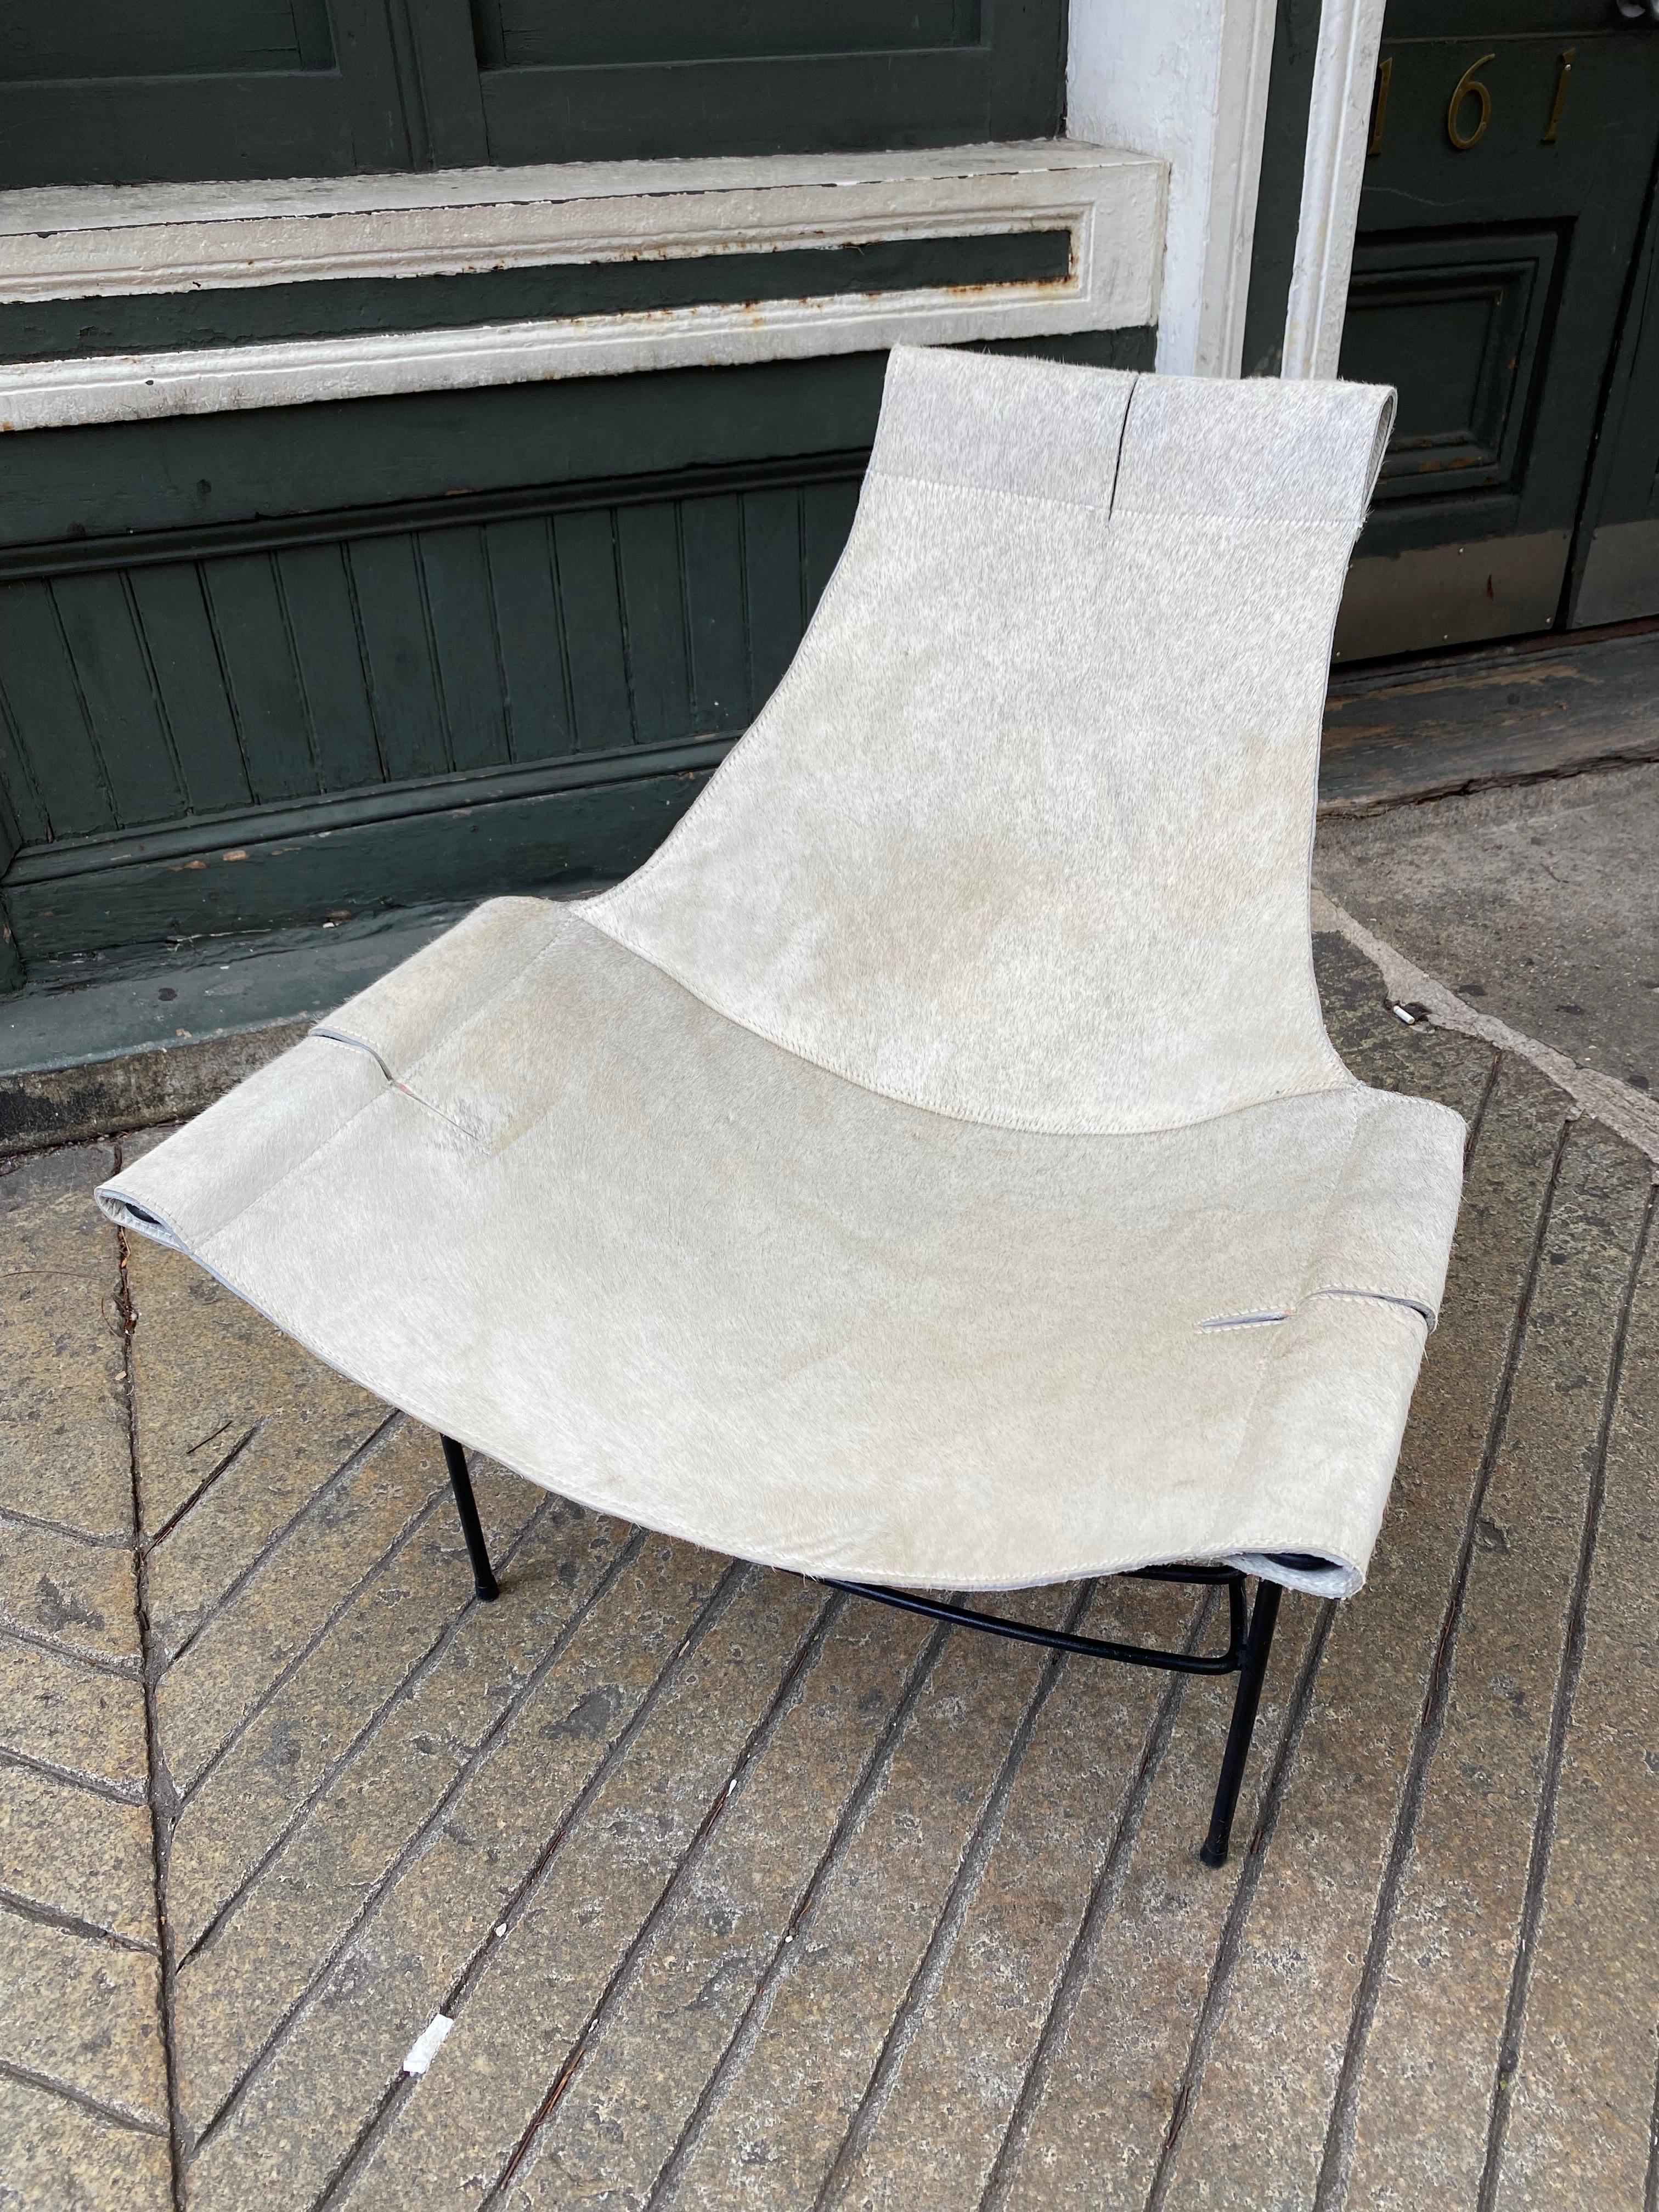 Jerry Johnson Iron Three-legged Lounge chair with new cowhide cover.  Surprisingly very comfortable and stable!  My upholsterer did an amazing job recreating the design of the original canvas cover.  Done in a double thickness for added durability